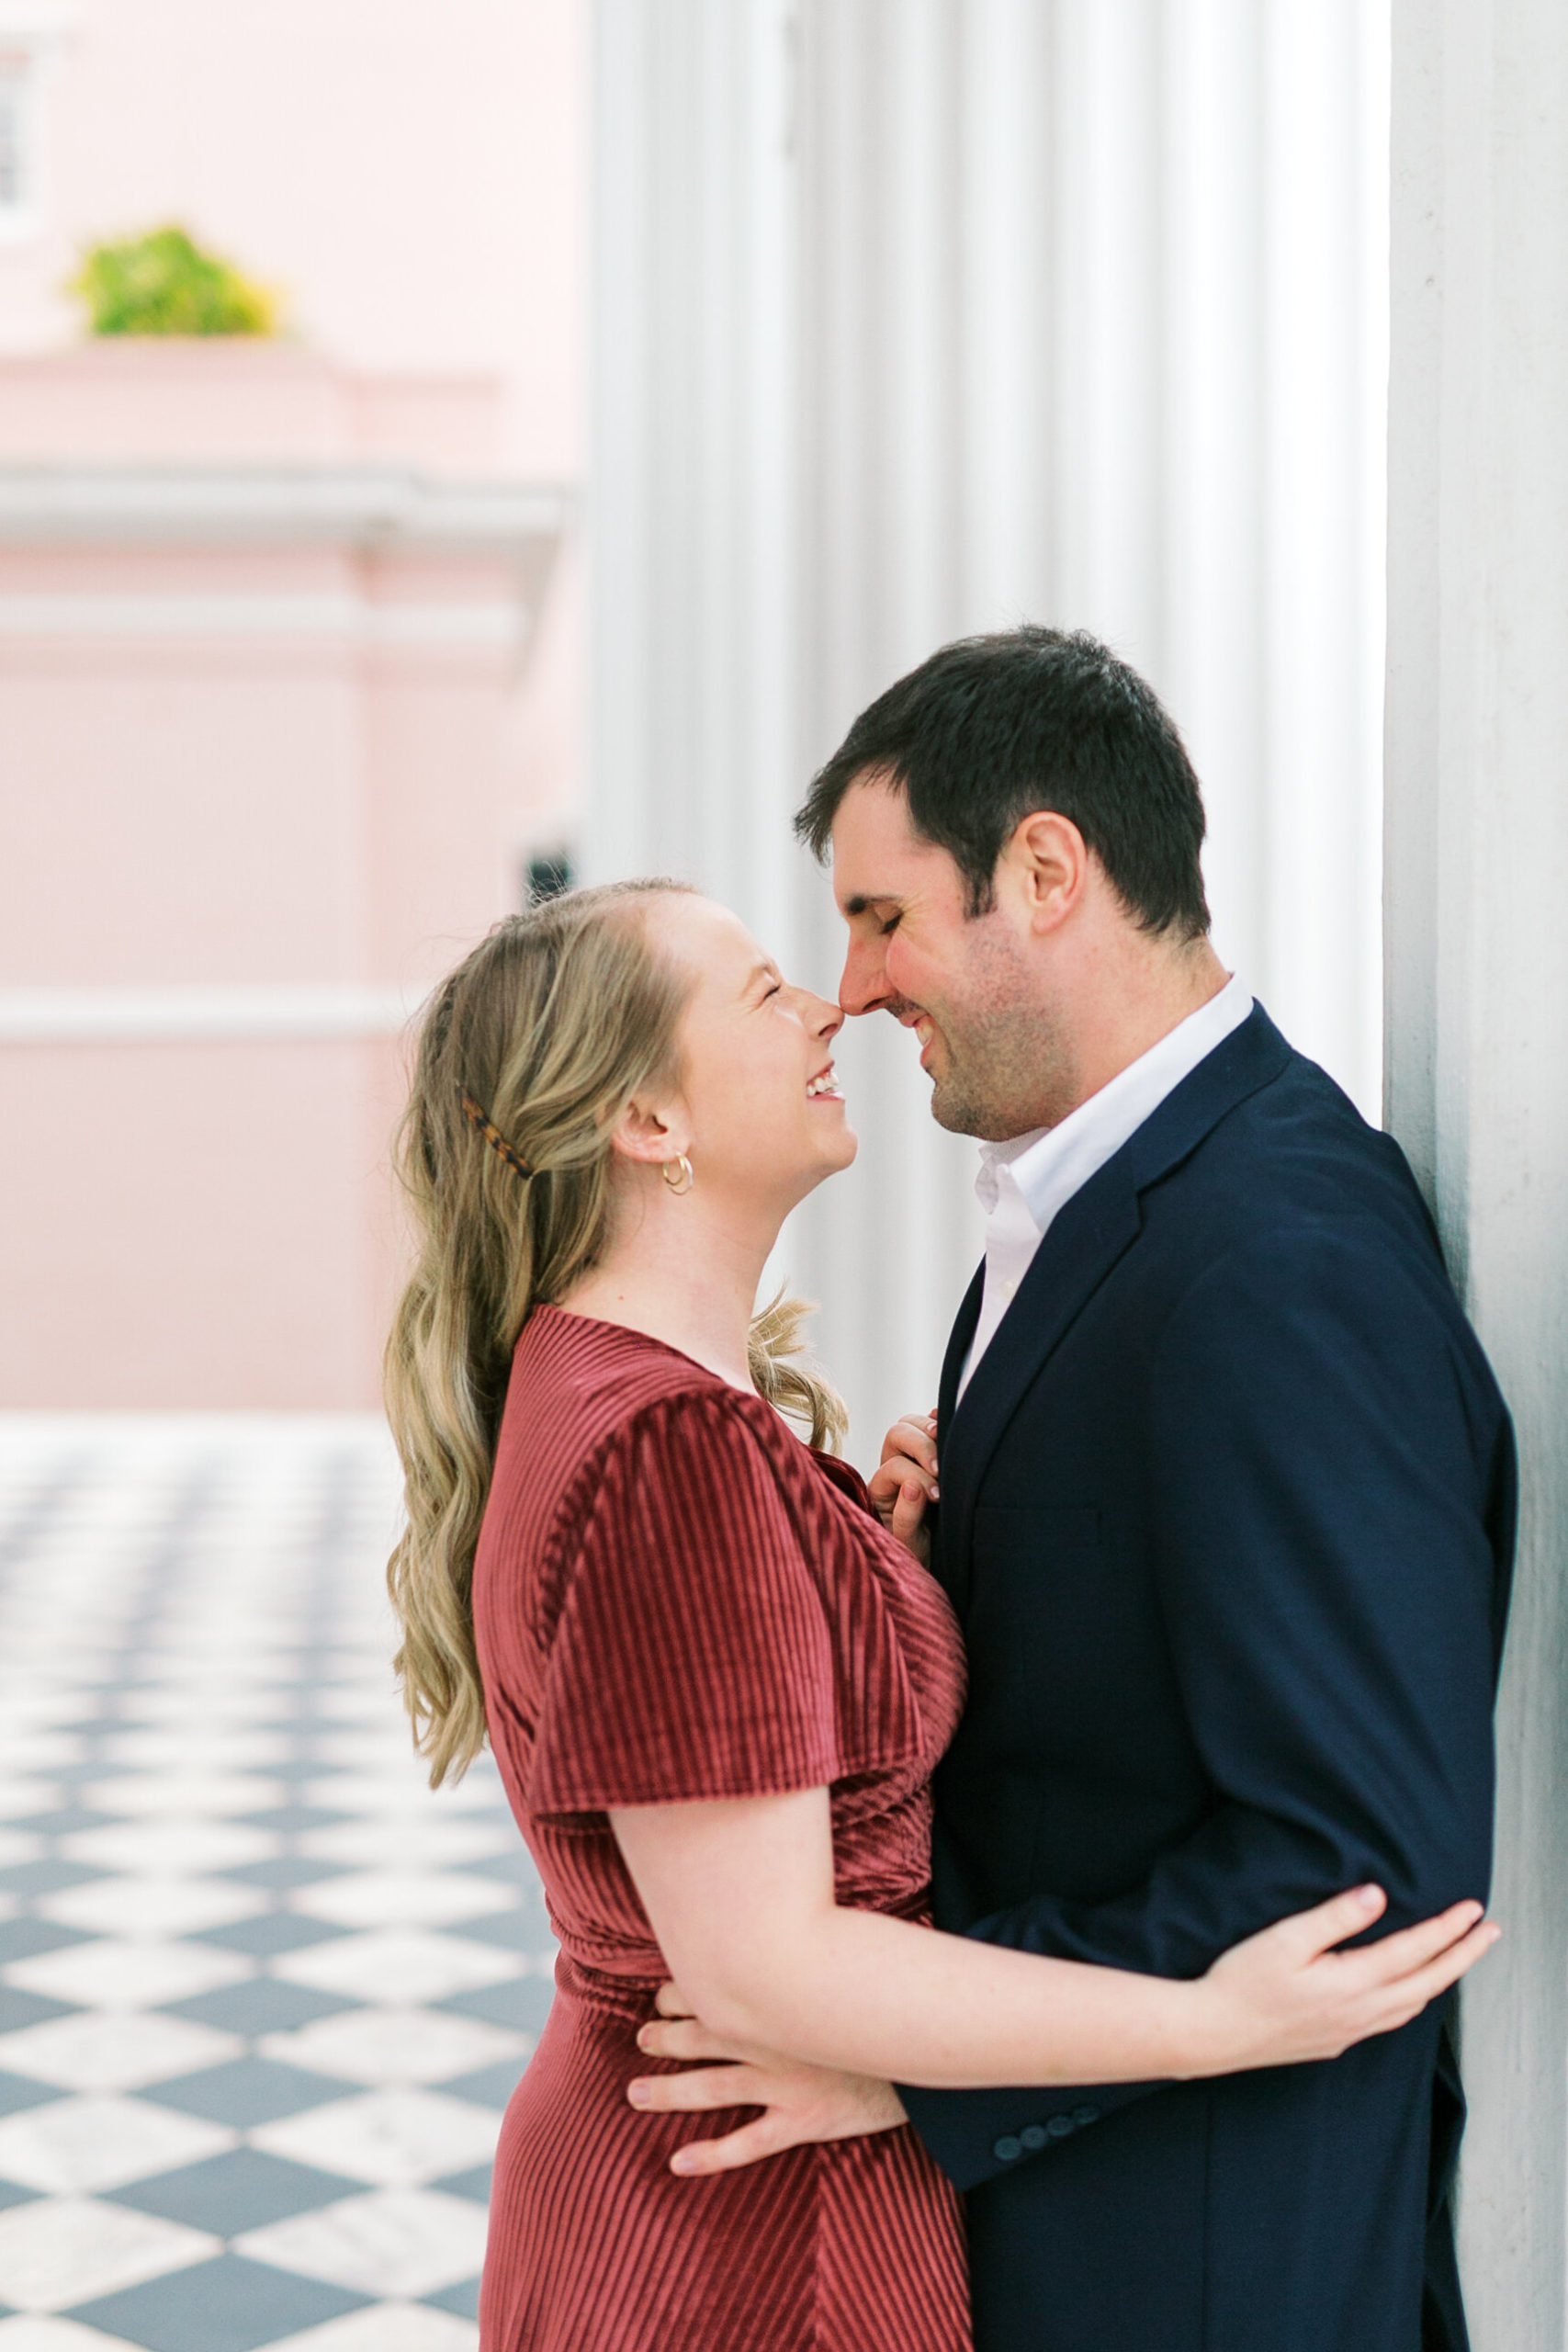 Adorable couple shares a sweet moment during their engagement photos in Charleston, South Carolina.